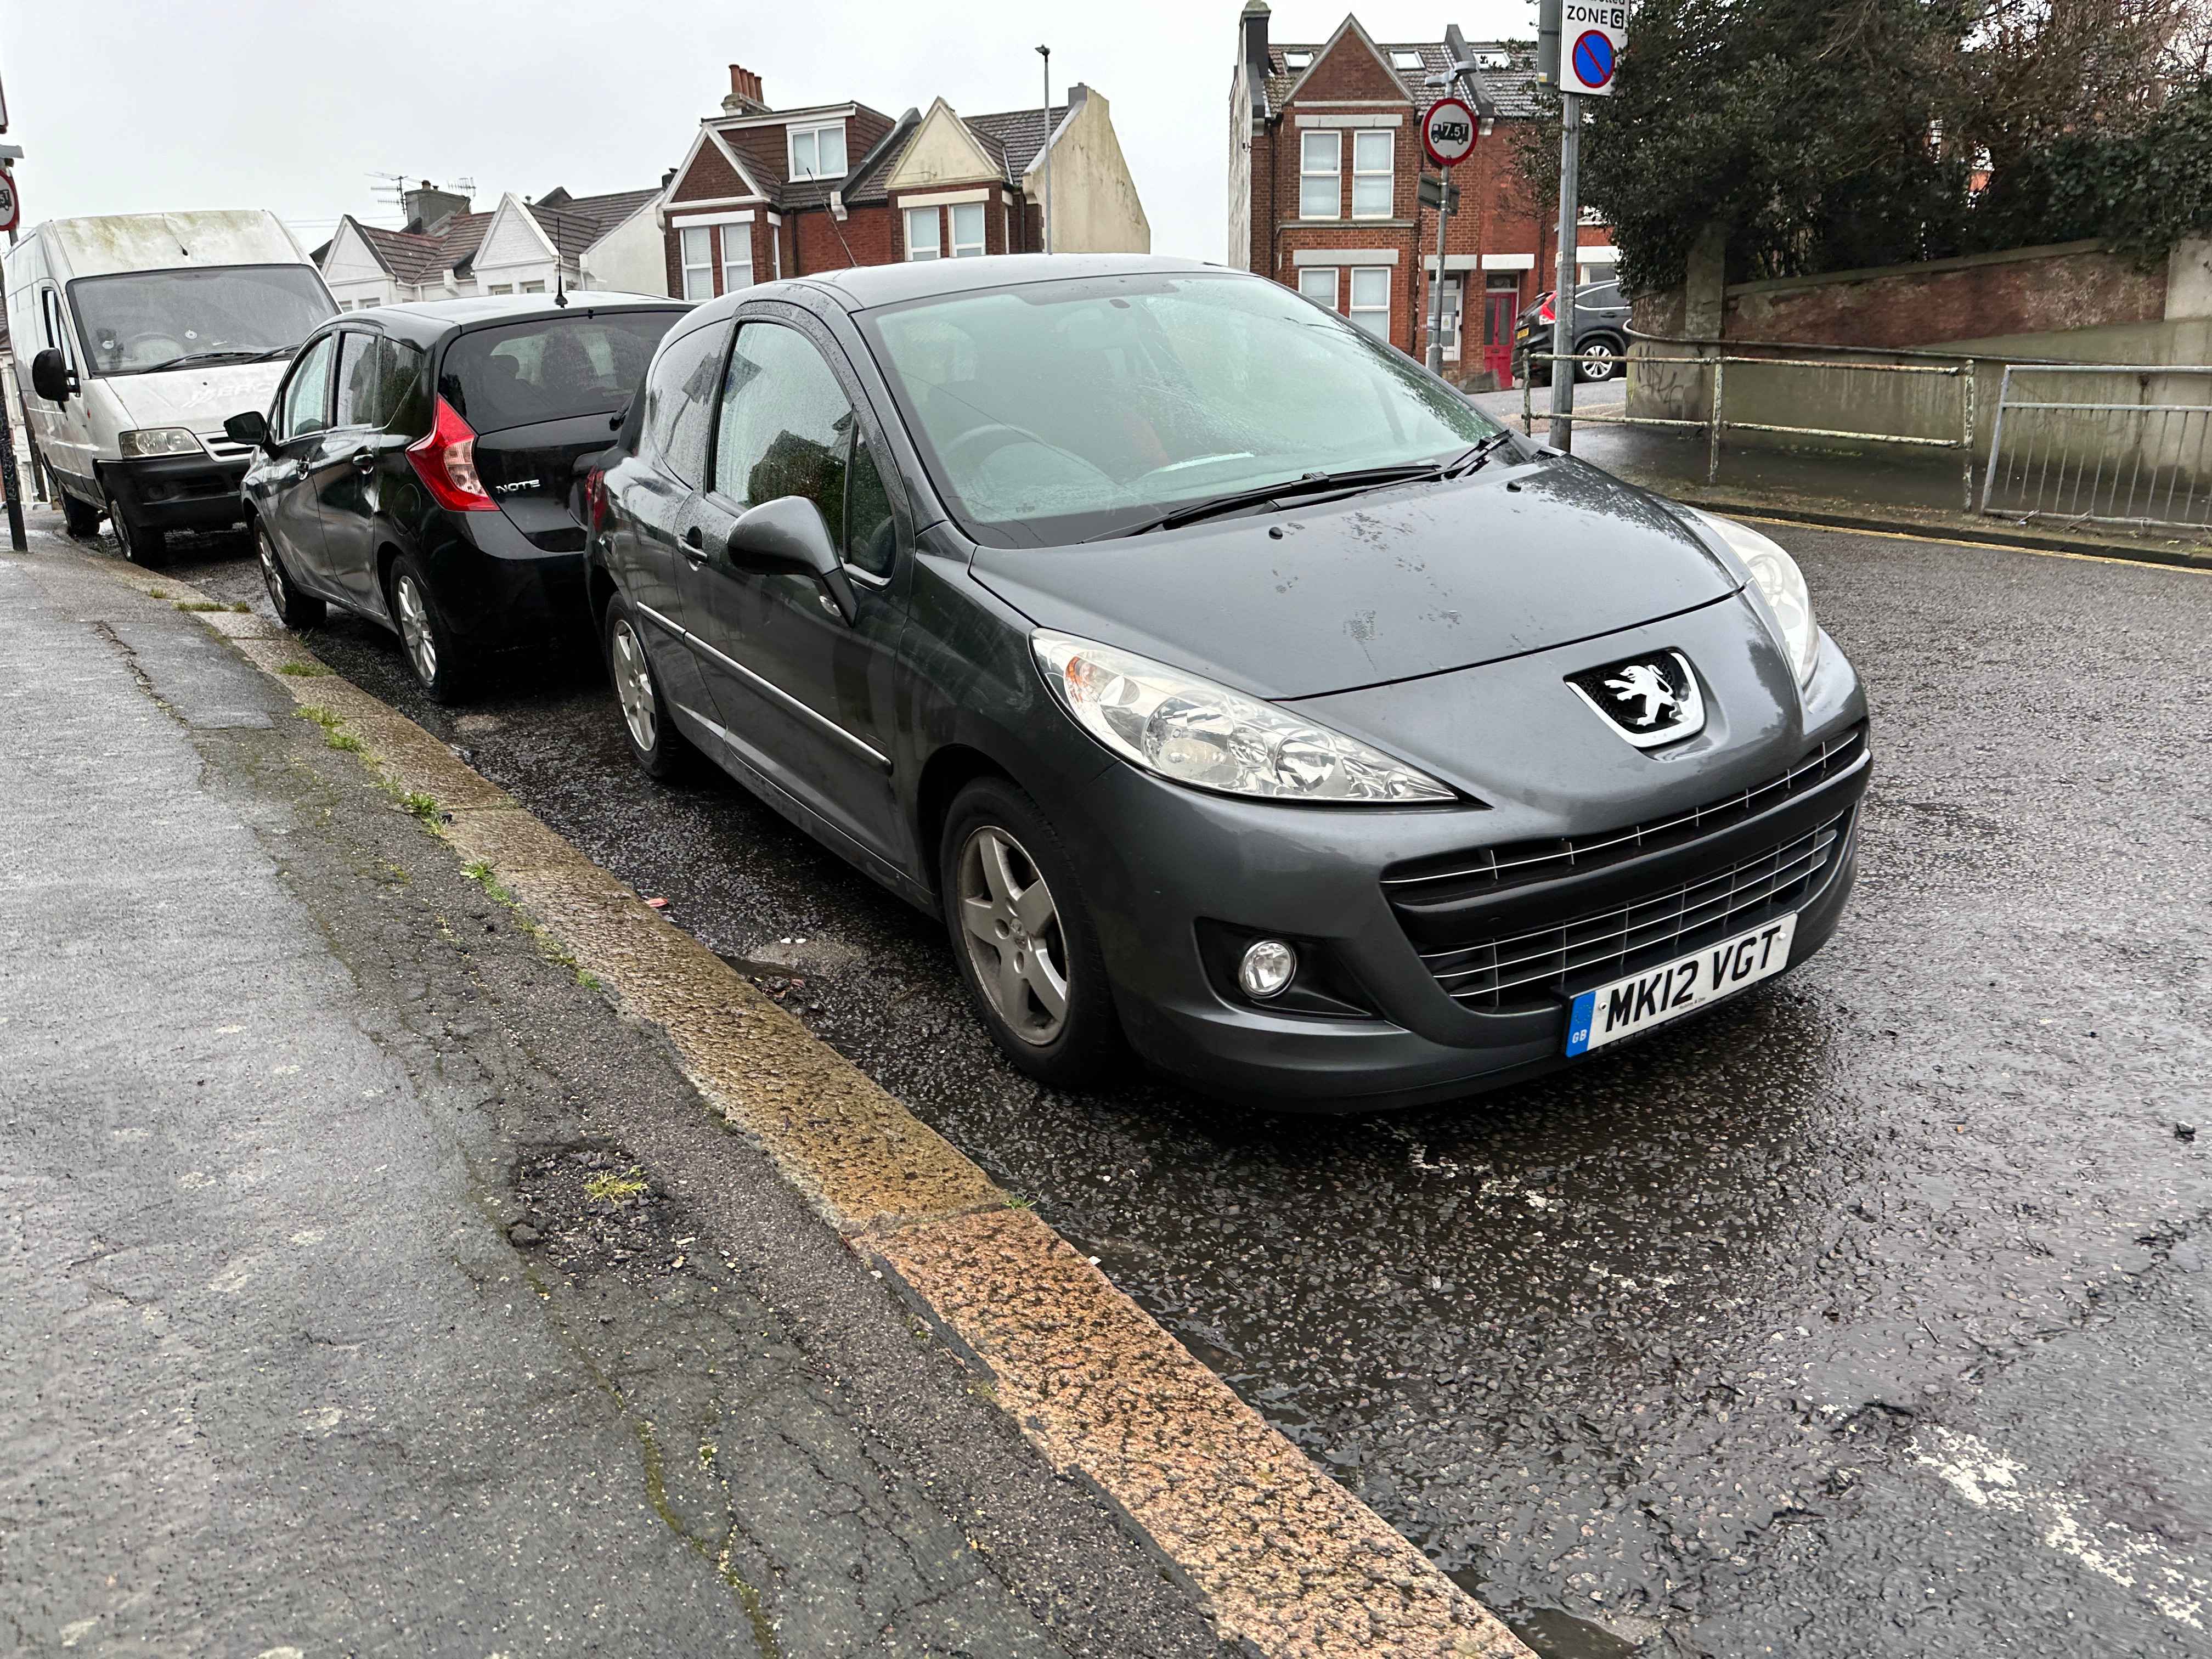 Photograph of MK12 VGT - a Grey Peugeot 207 parked in Hollingdean by a non-resident who uses the local area as part of their Brighton commute. The sixth of six photographs supplied by the residents of Hollingdean.